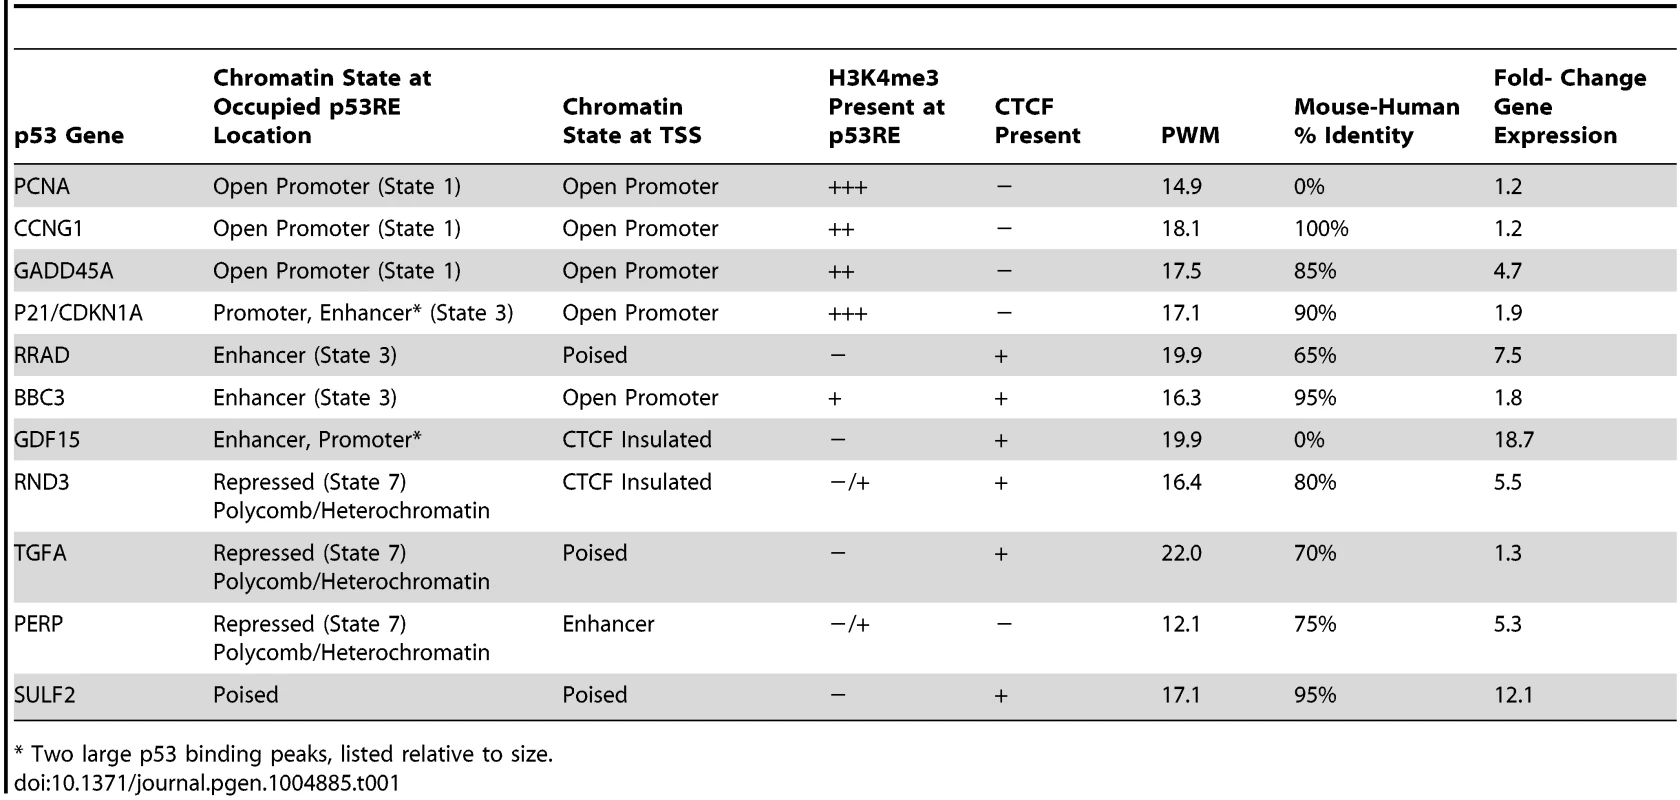 Chromatin state characteristics of some known p53 regulated genes.